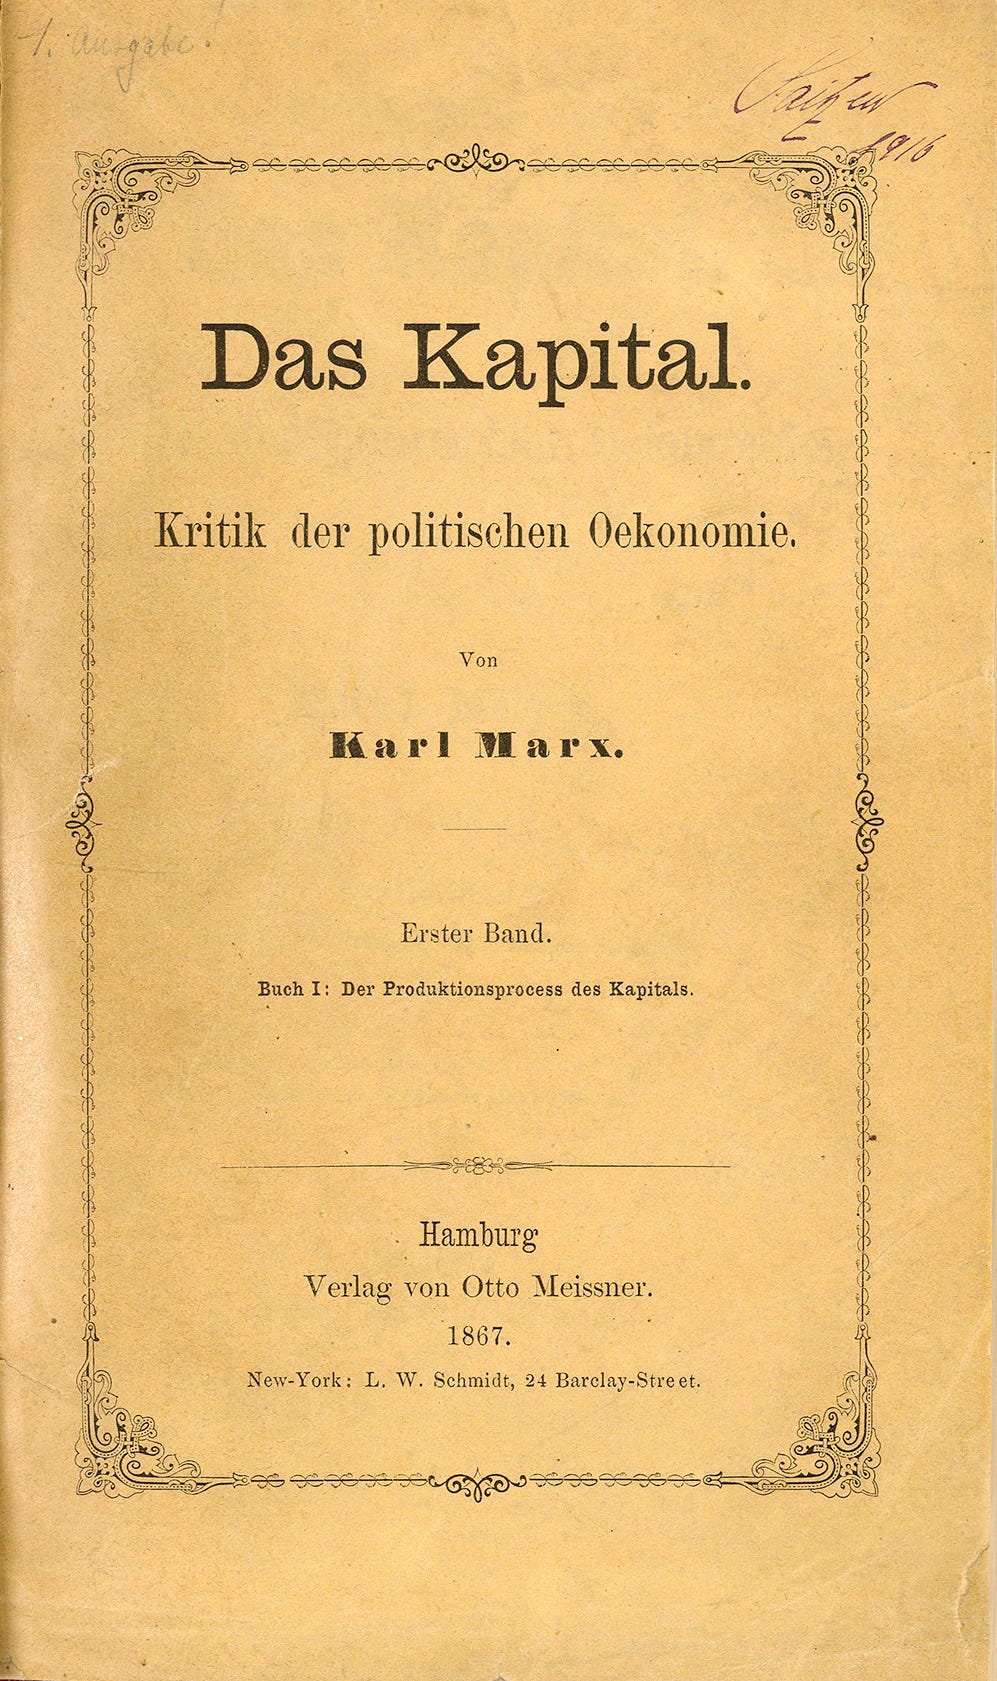 First edition title page of Volume I (1867). Volume II and Volume III were published in 1885 and 1894, respectively. Zentralbibliothek Zürich project, Public Domain